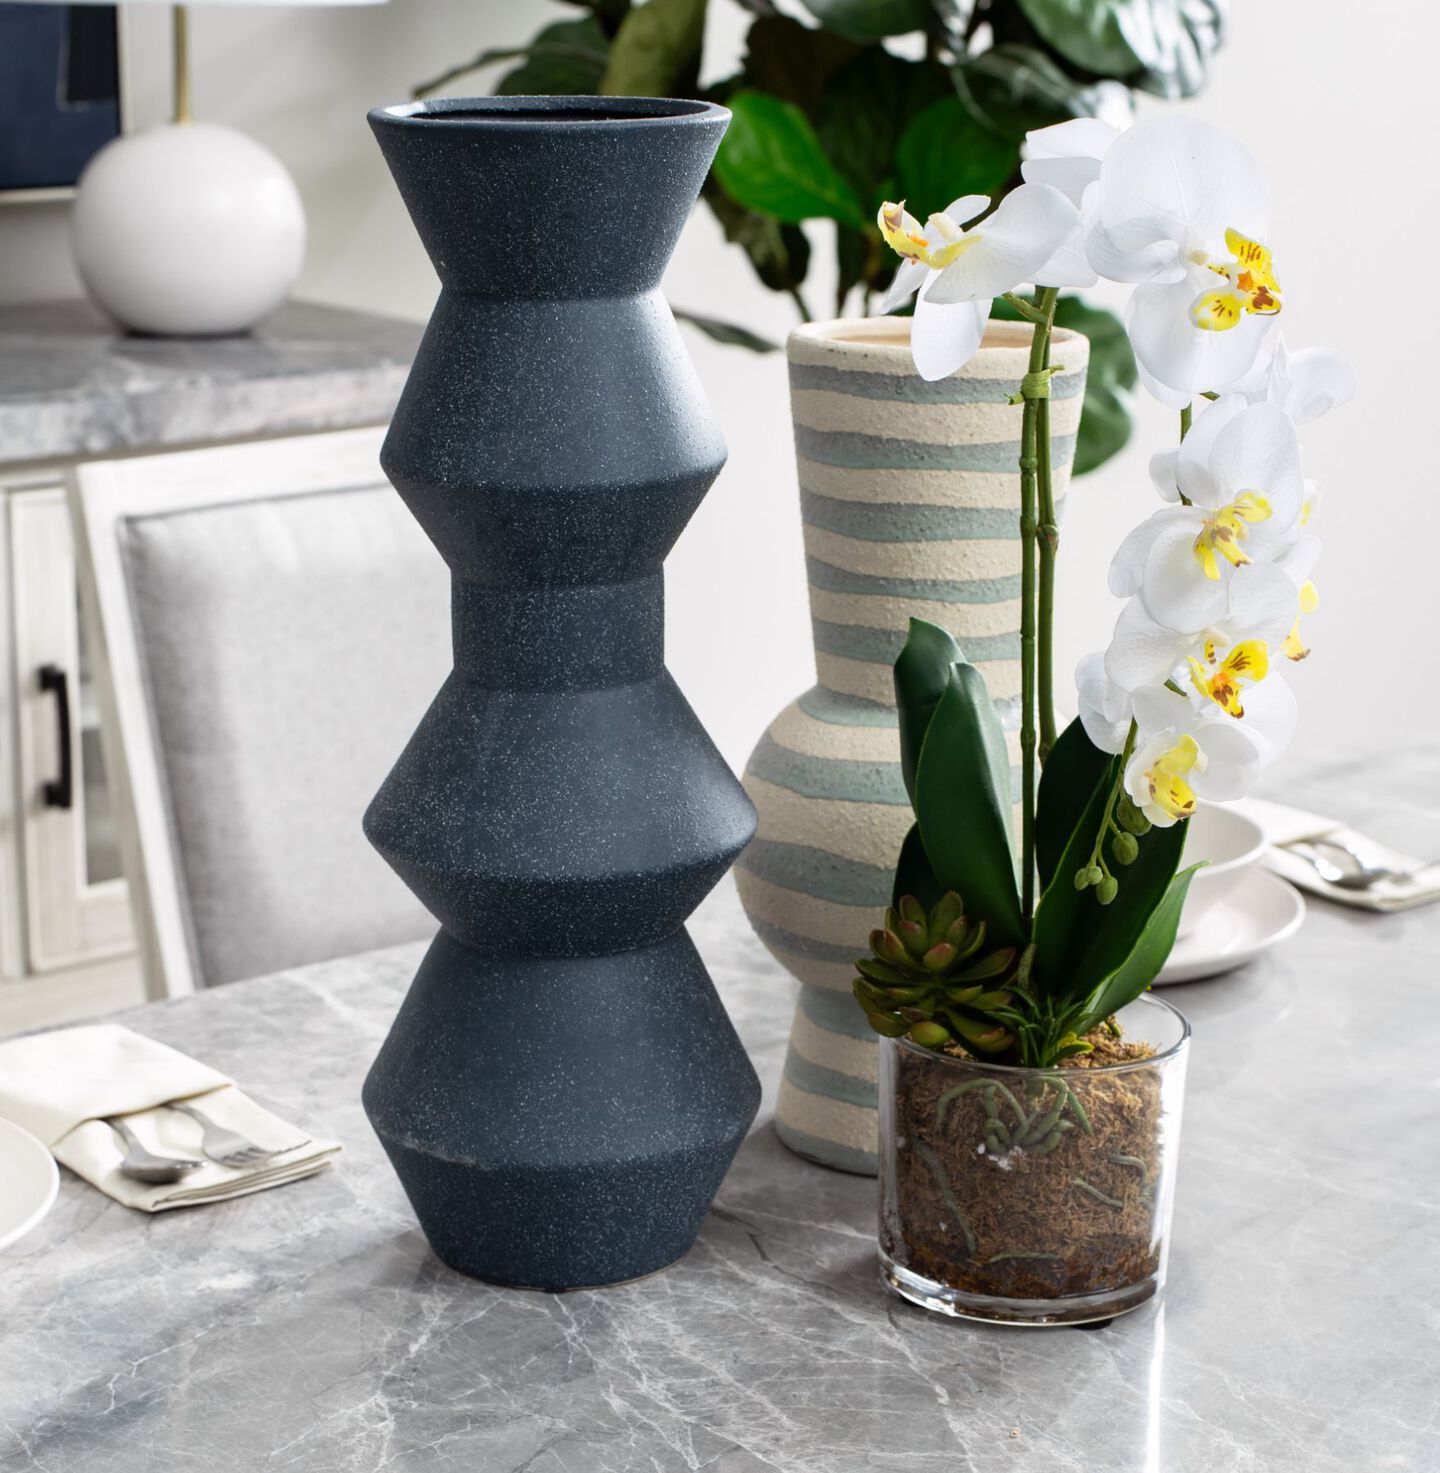 Grey marble counter with two vases and a potted faux plant